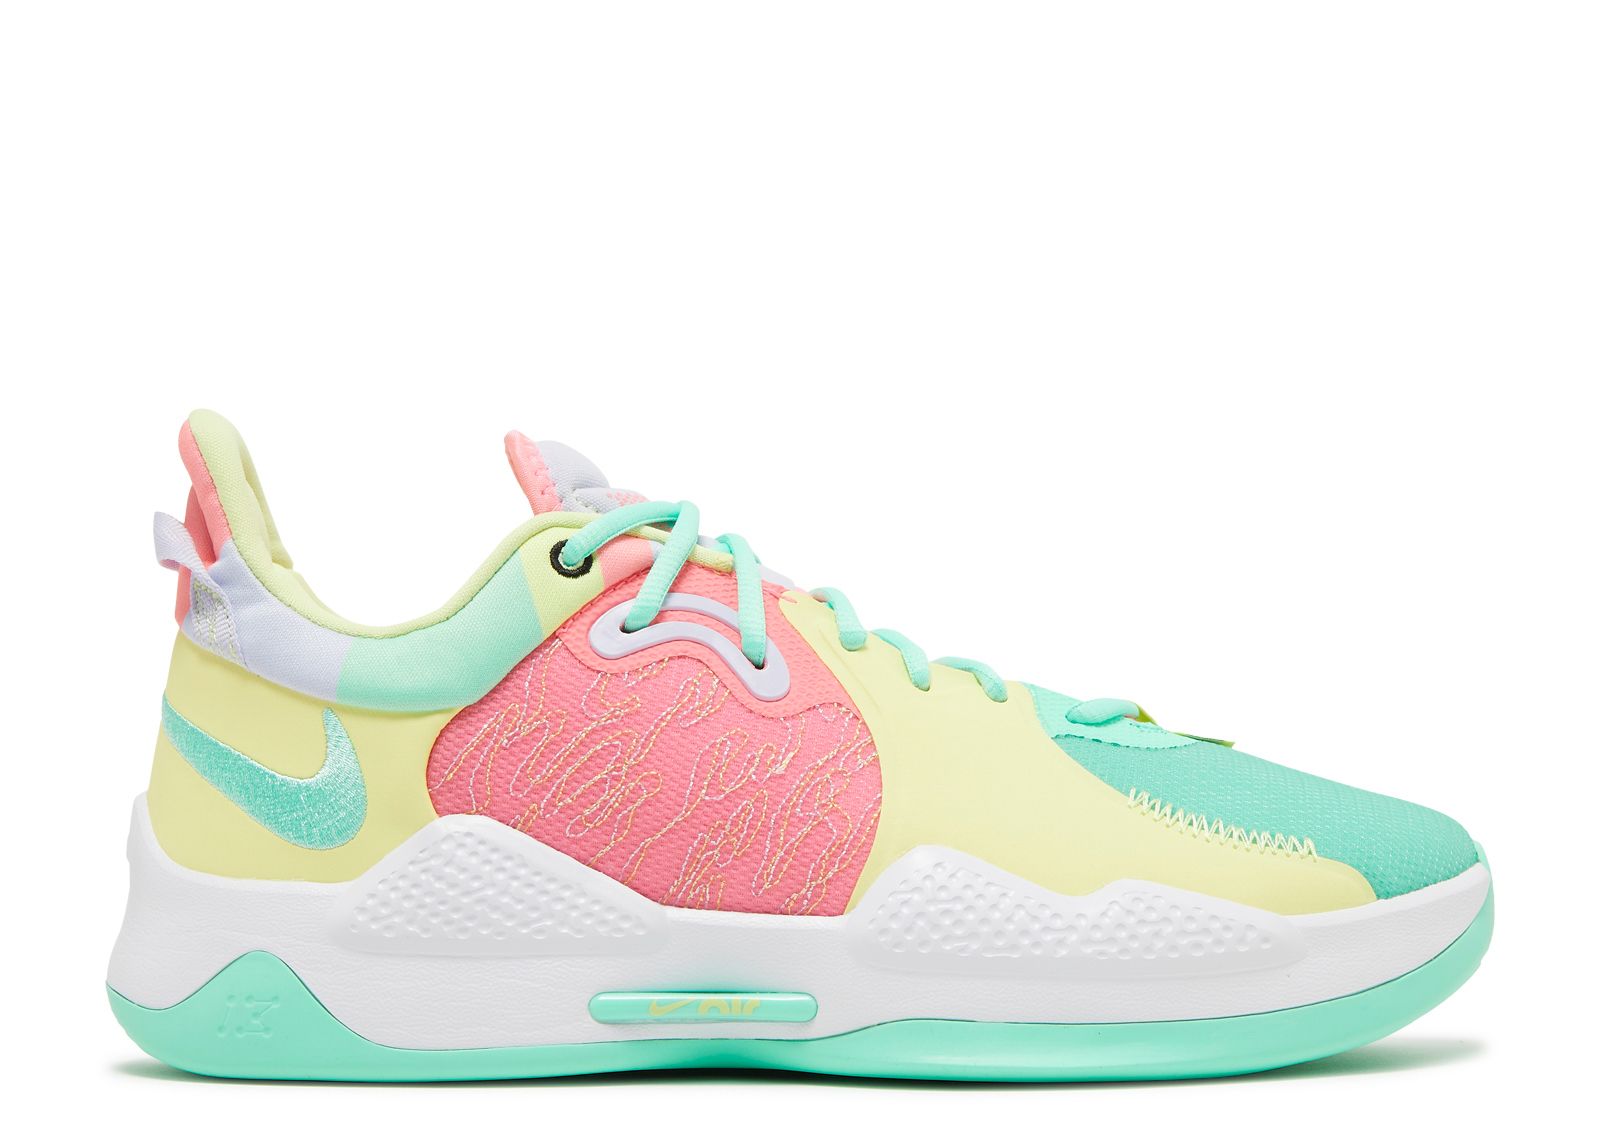 PG 5 EP 'Daughters' - Nike - CW3146 301 - green glow/white/sunset